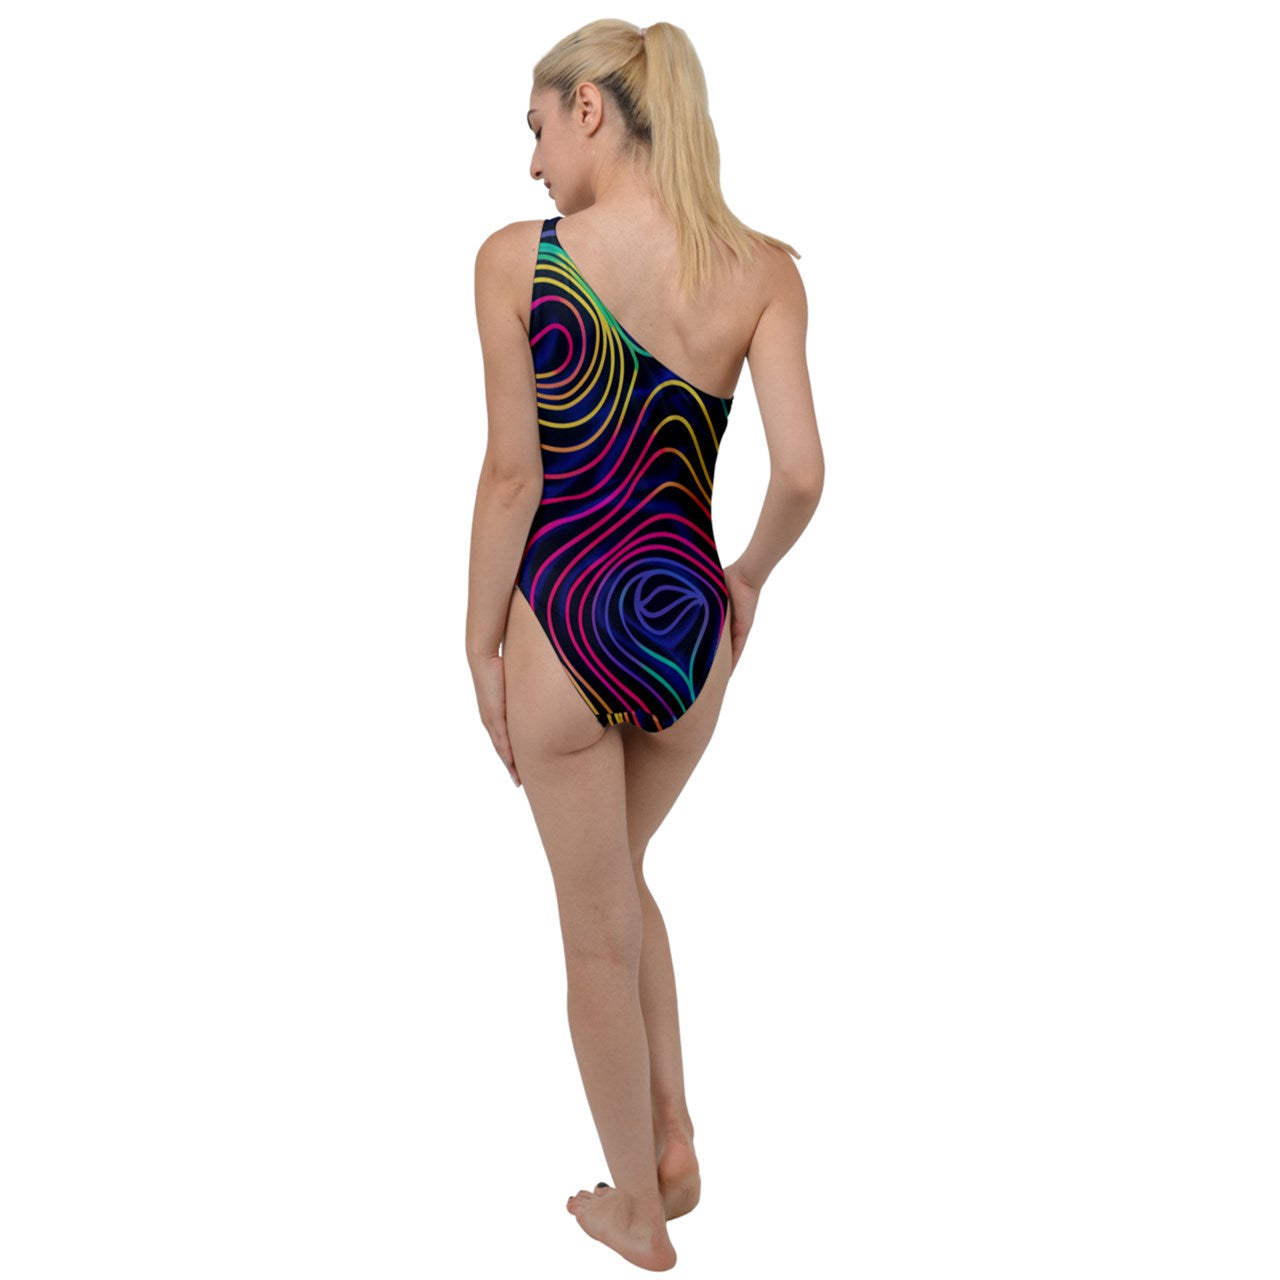 Neon Rainbow To One Side Swimsuit